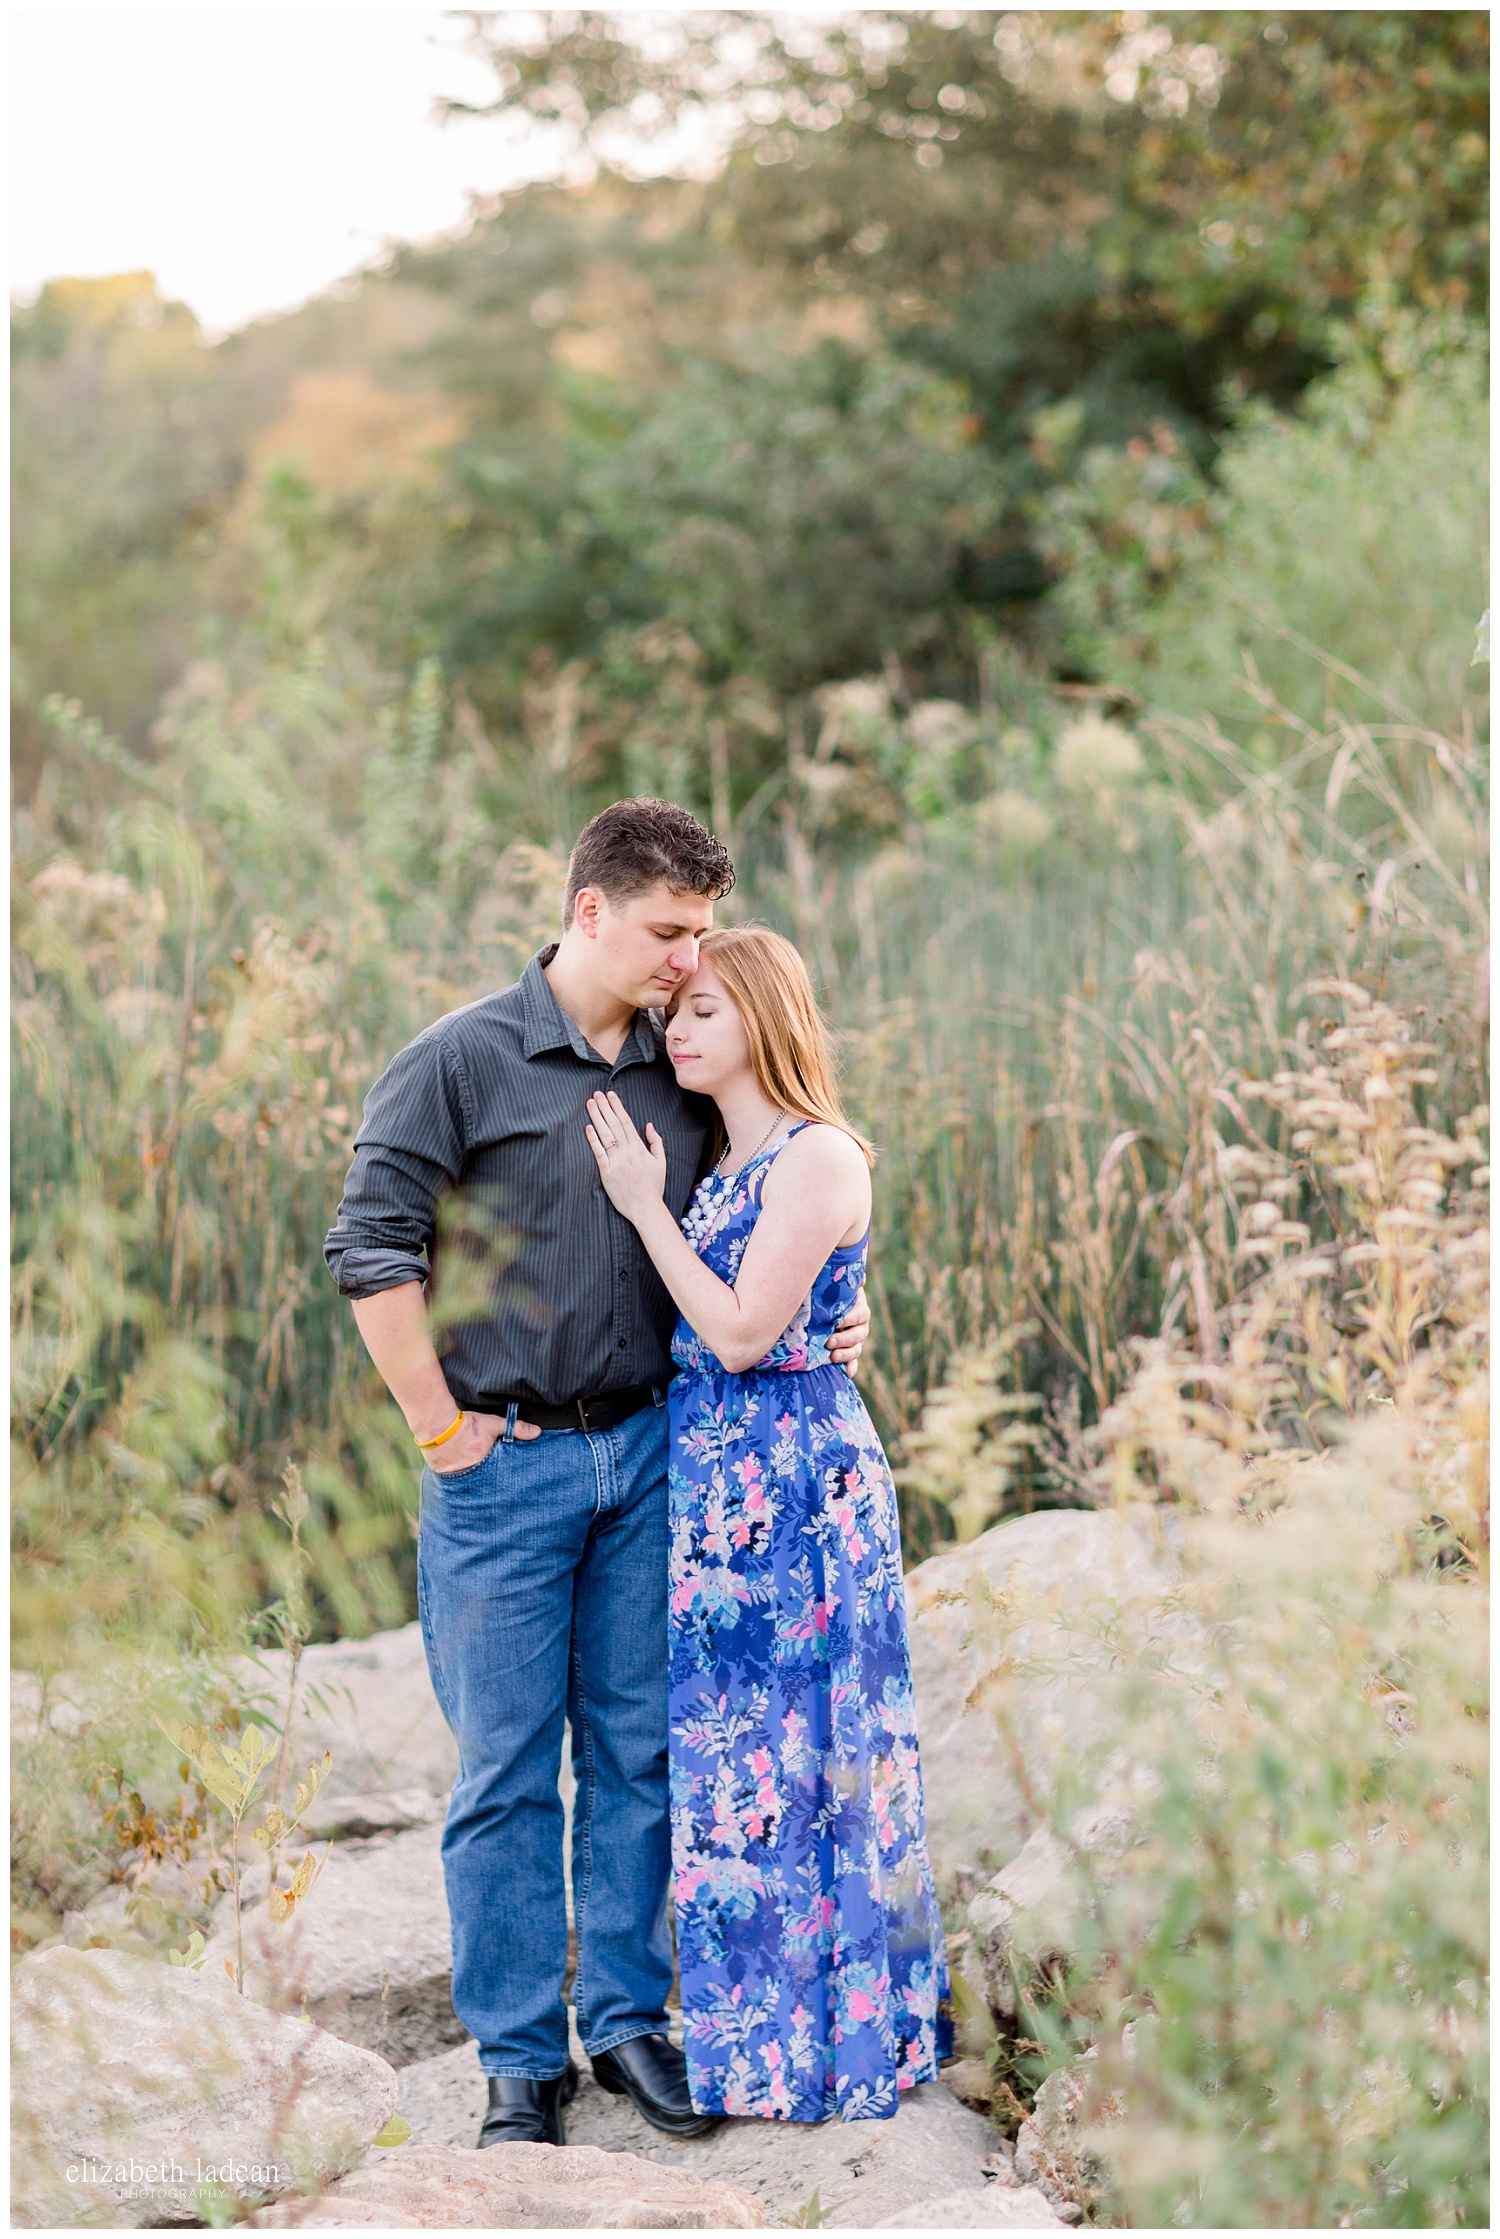 Northland-KC-Fall-Engagement-Photos-with-dog-A+B-2018-elizabeth-ladean-photography-photo_1501.jpg